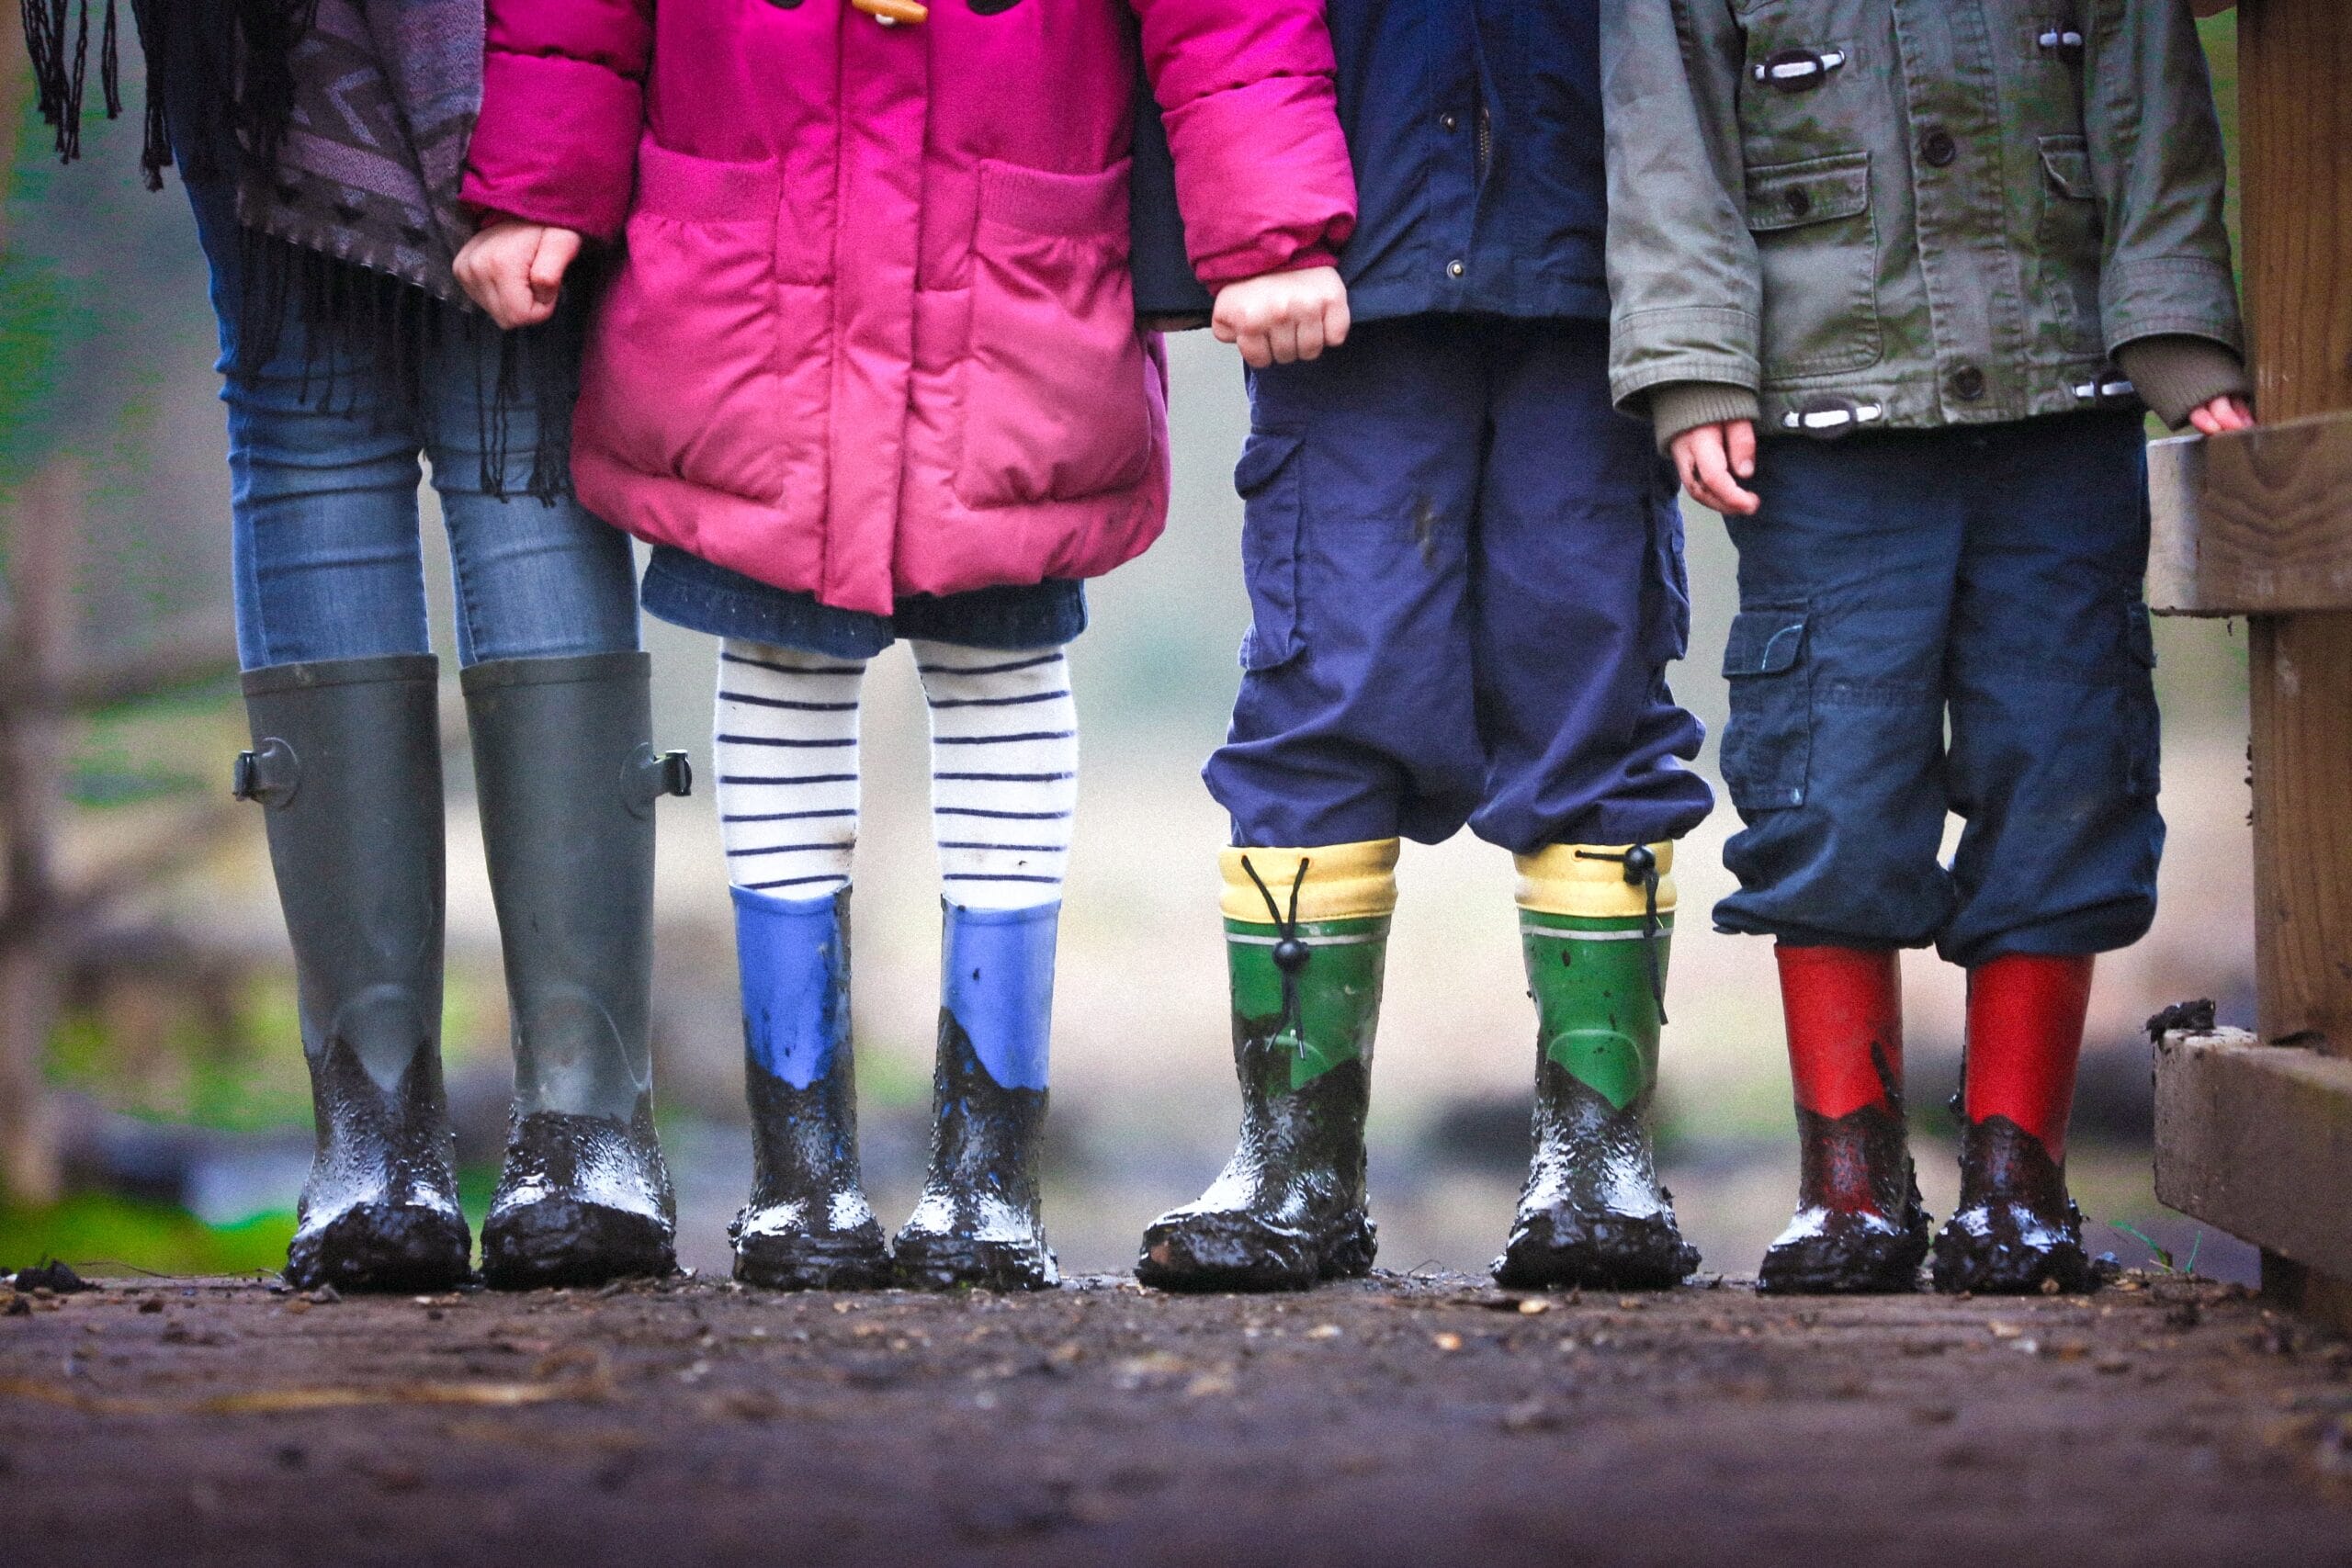 Four people standing in muddy rubber boots.